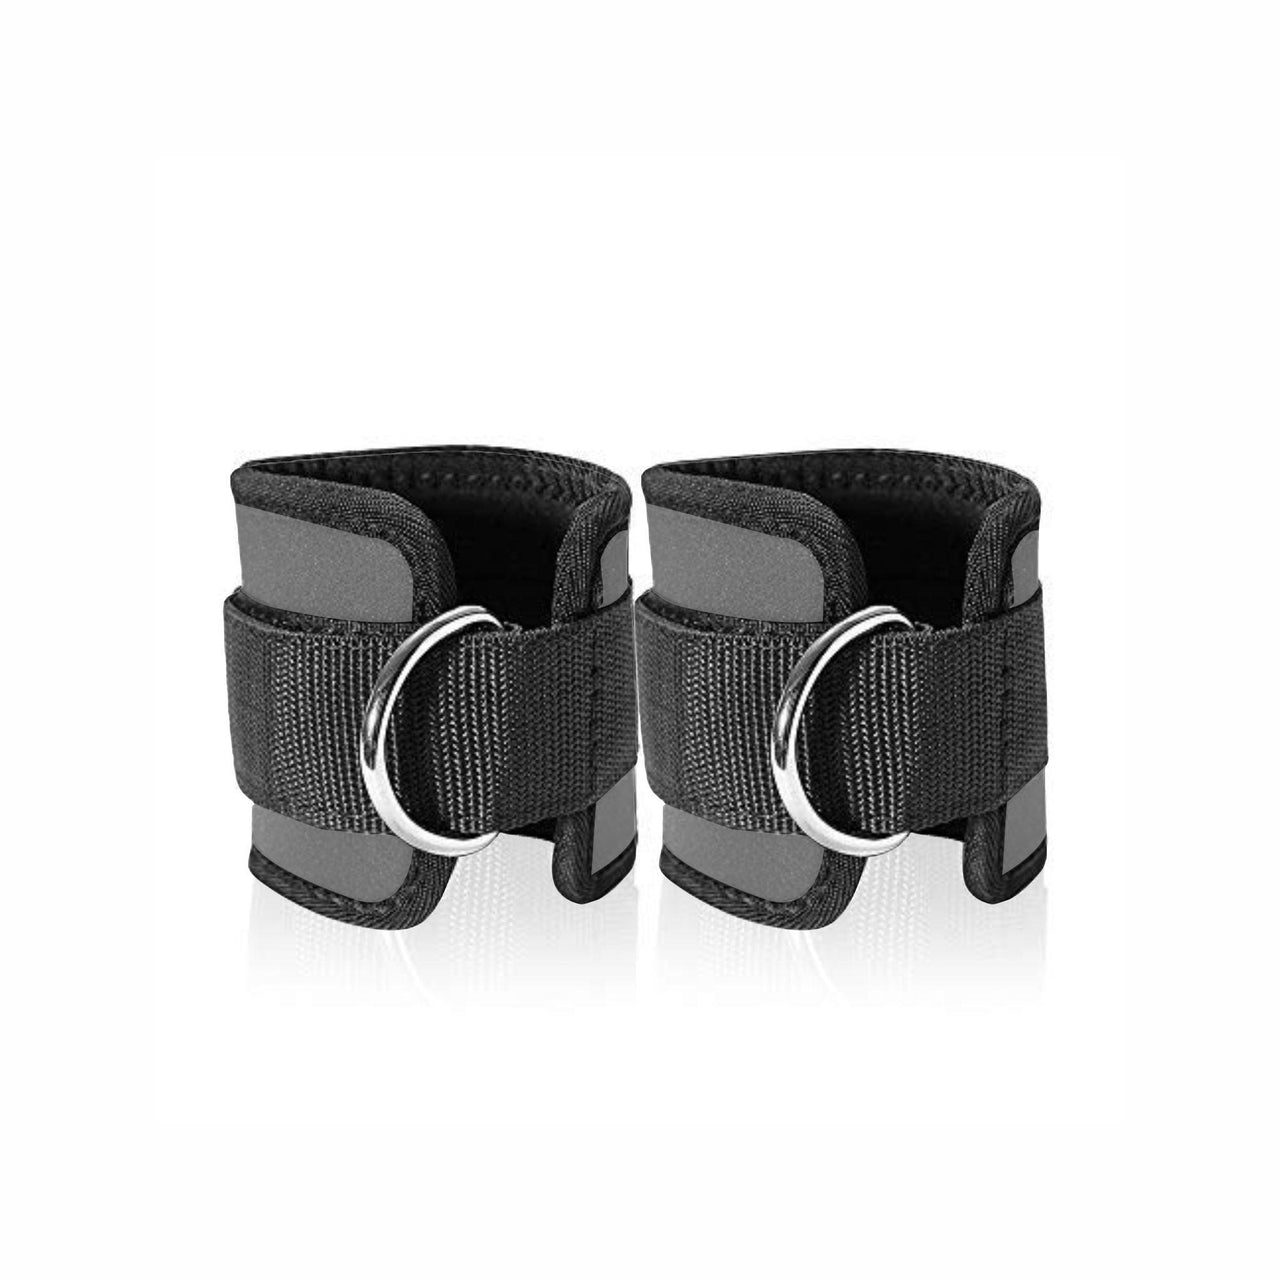 1 Pair Gym Ankle Straps Double D-Ring Adjustable Ankle Cuffs Gym